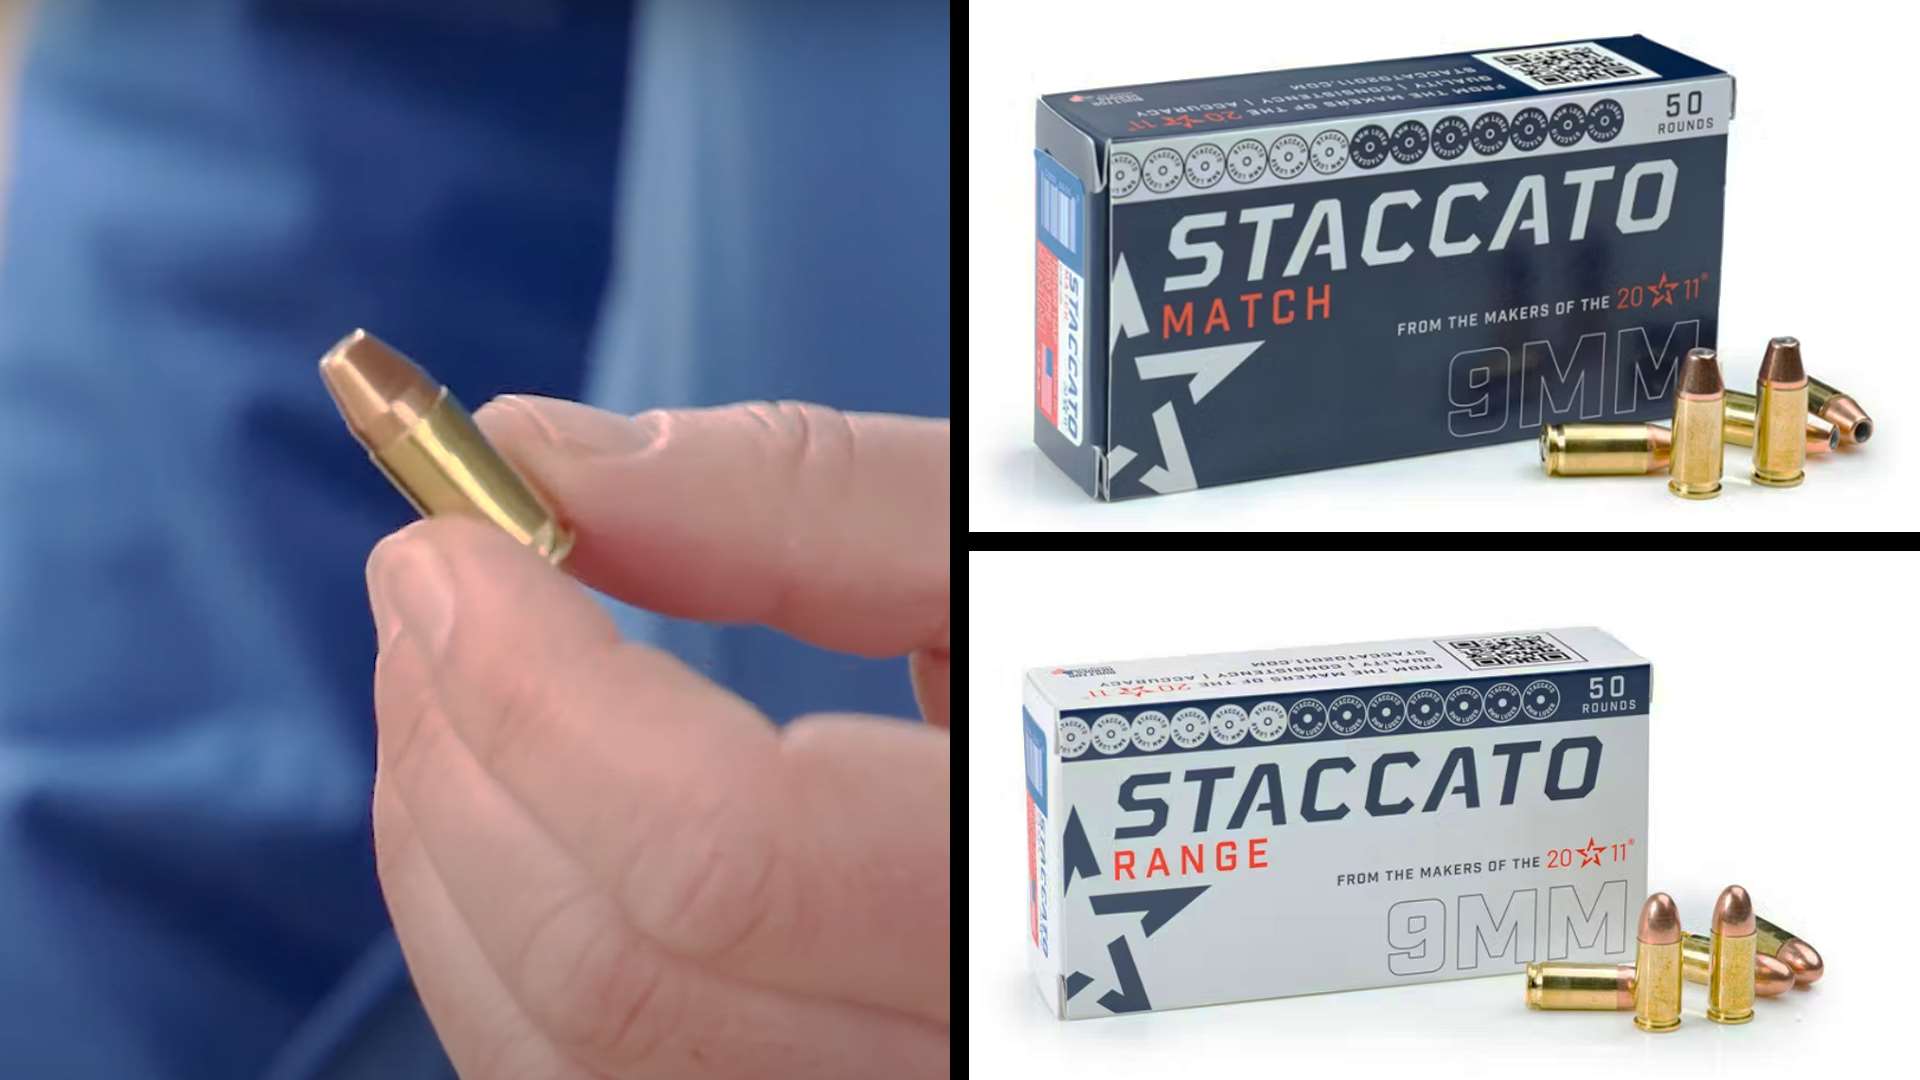 Staccato 9 mm ammunition